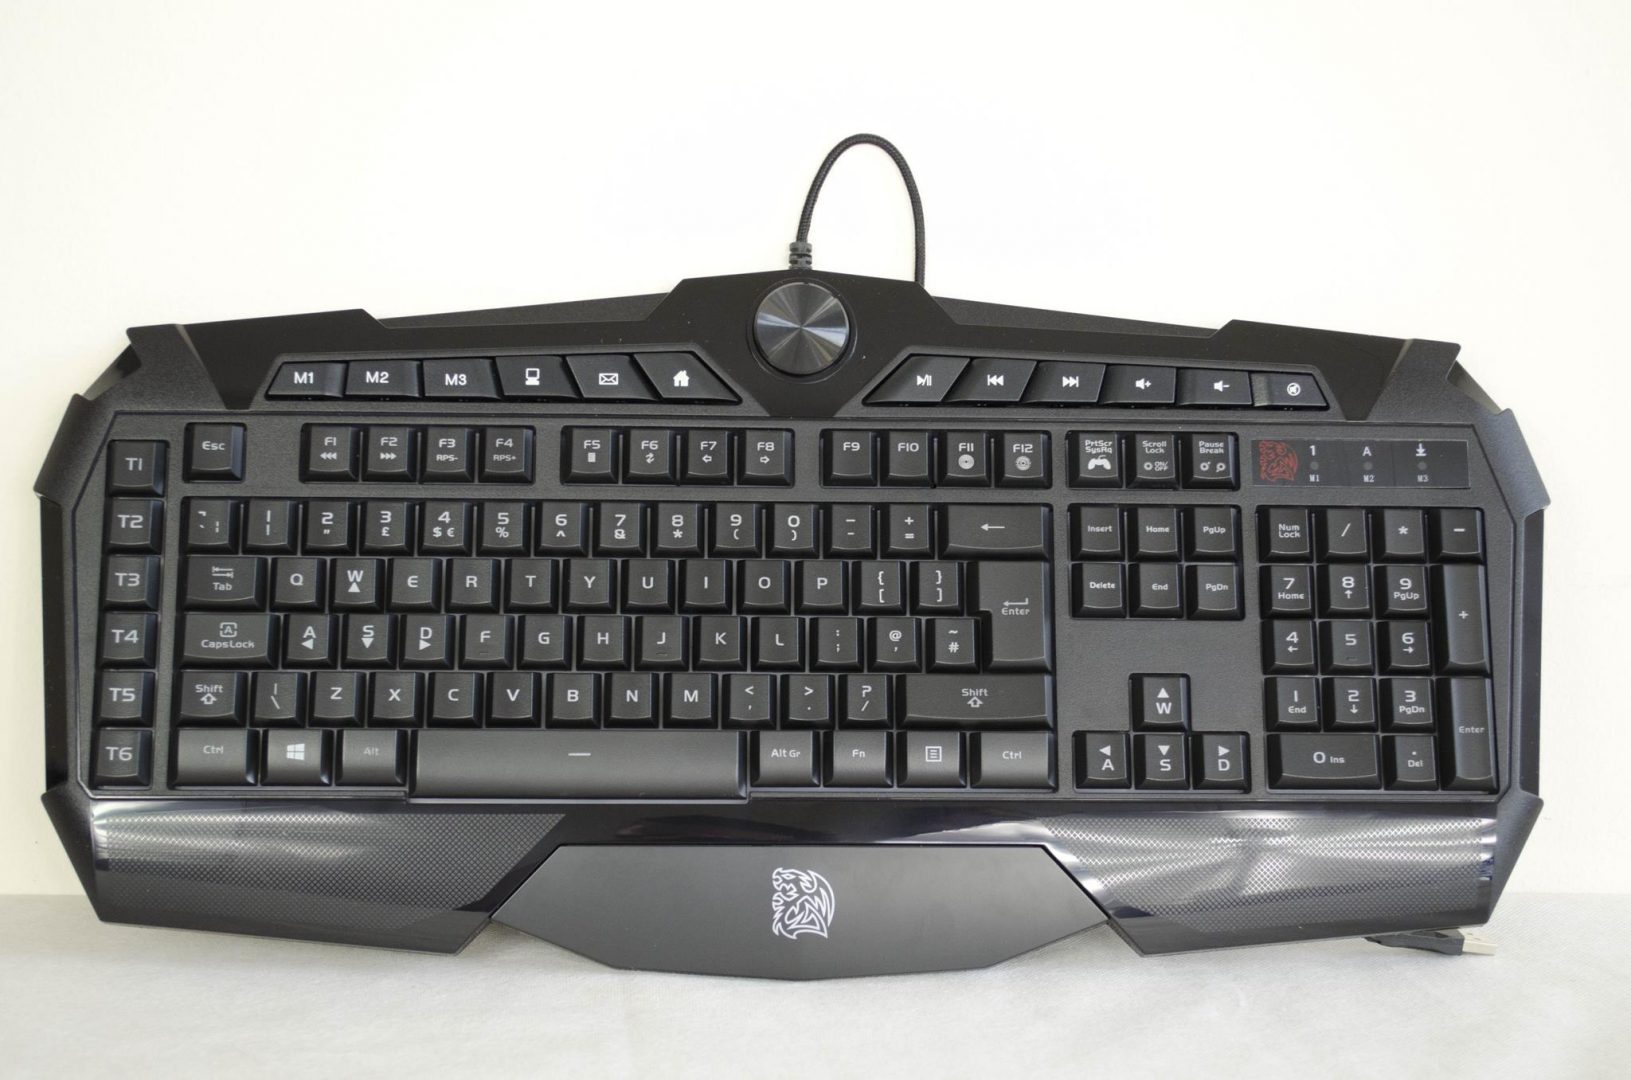 Tt eSPORTS Challenger Prime Gaming Keyboard Review